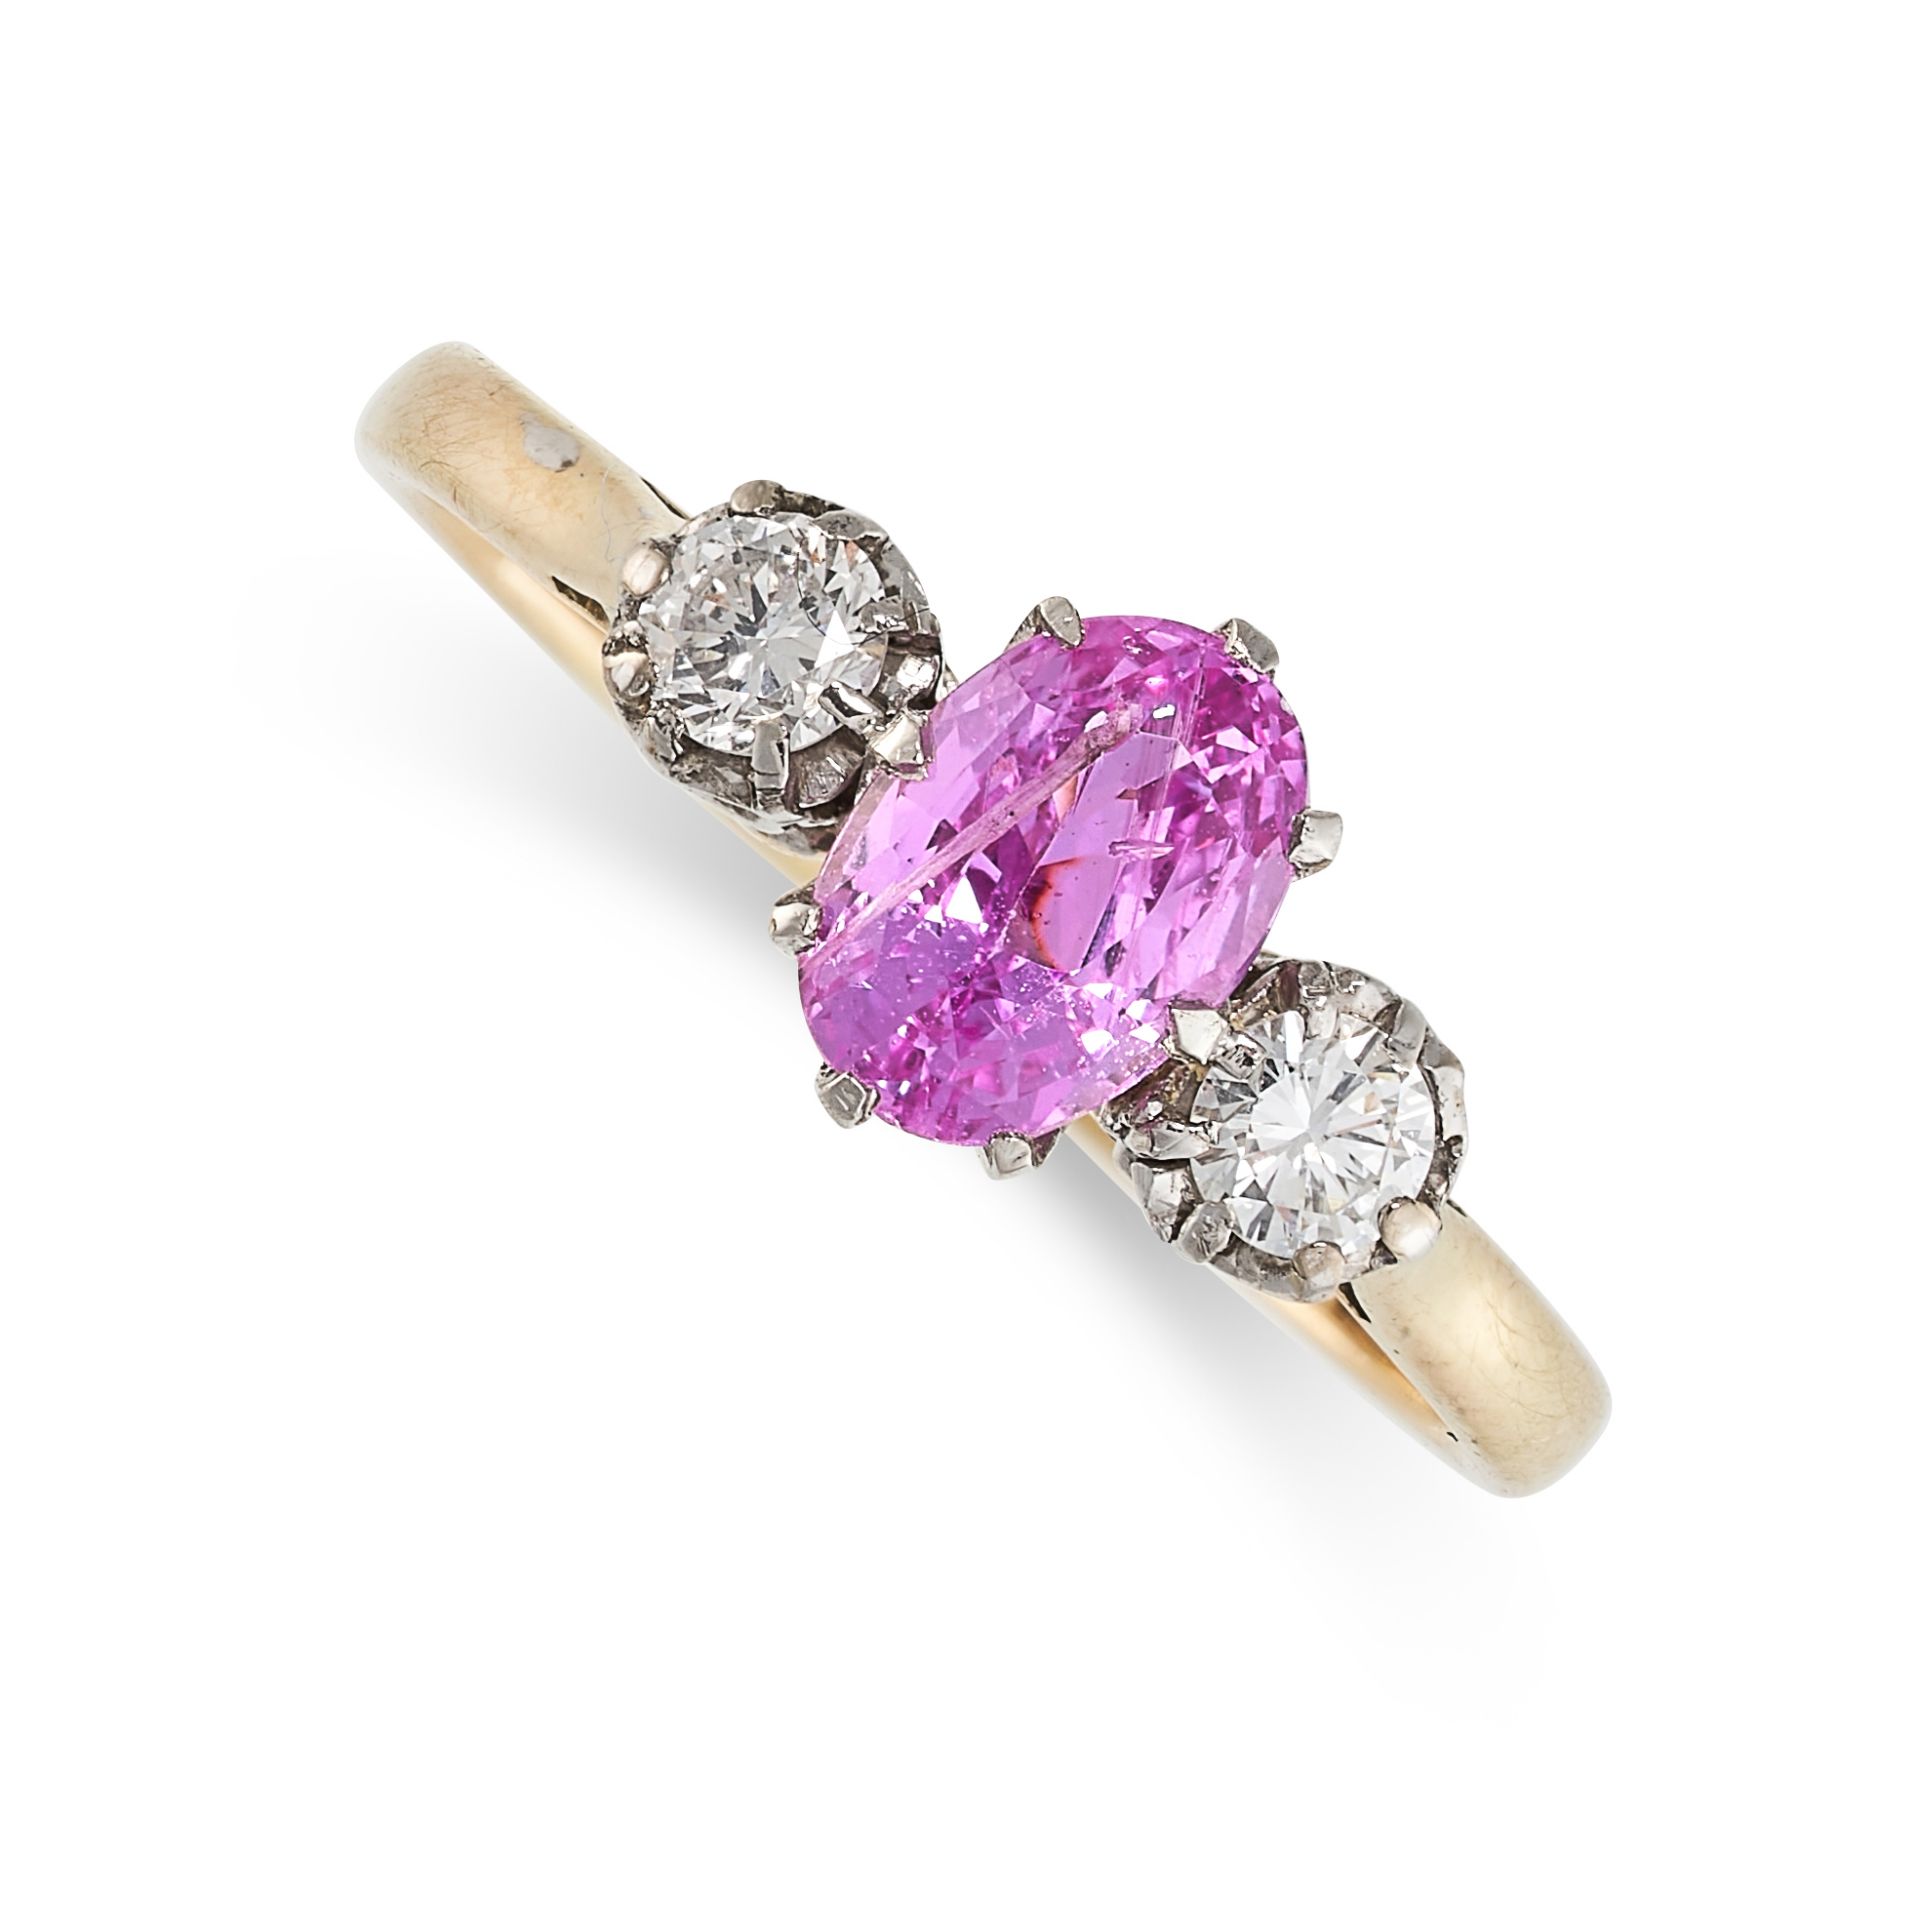 A PINK SAPPHIRE AND DIAMOND THREE-STONE RING  Oval-cut pink sapphire, approximately 1.01 carats